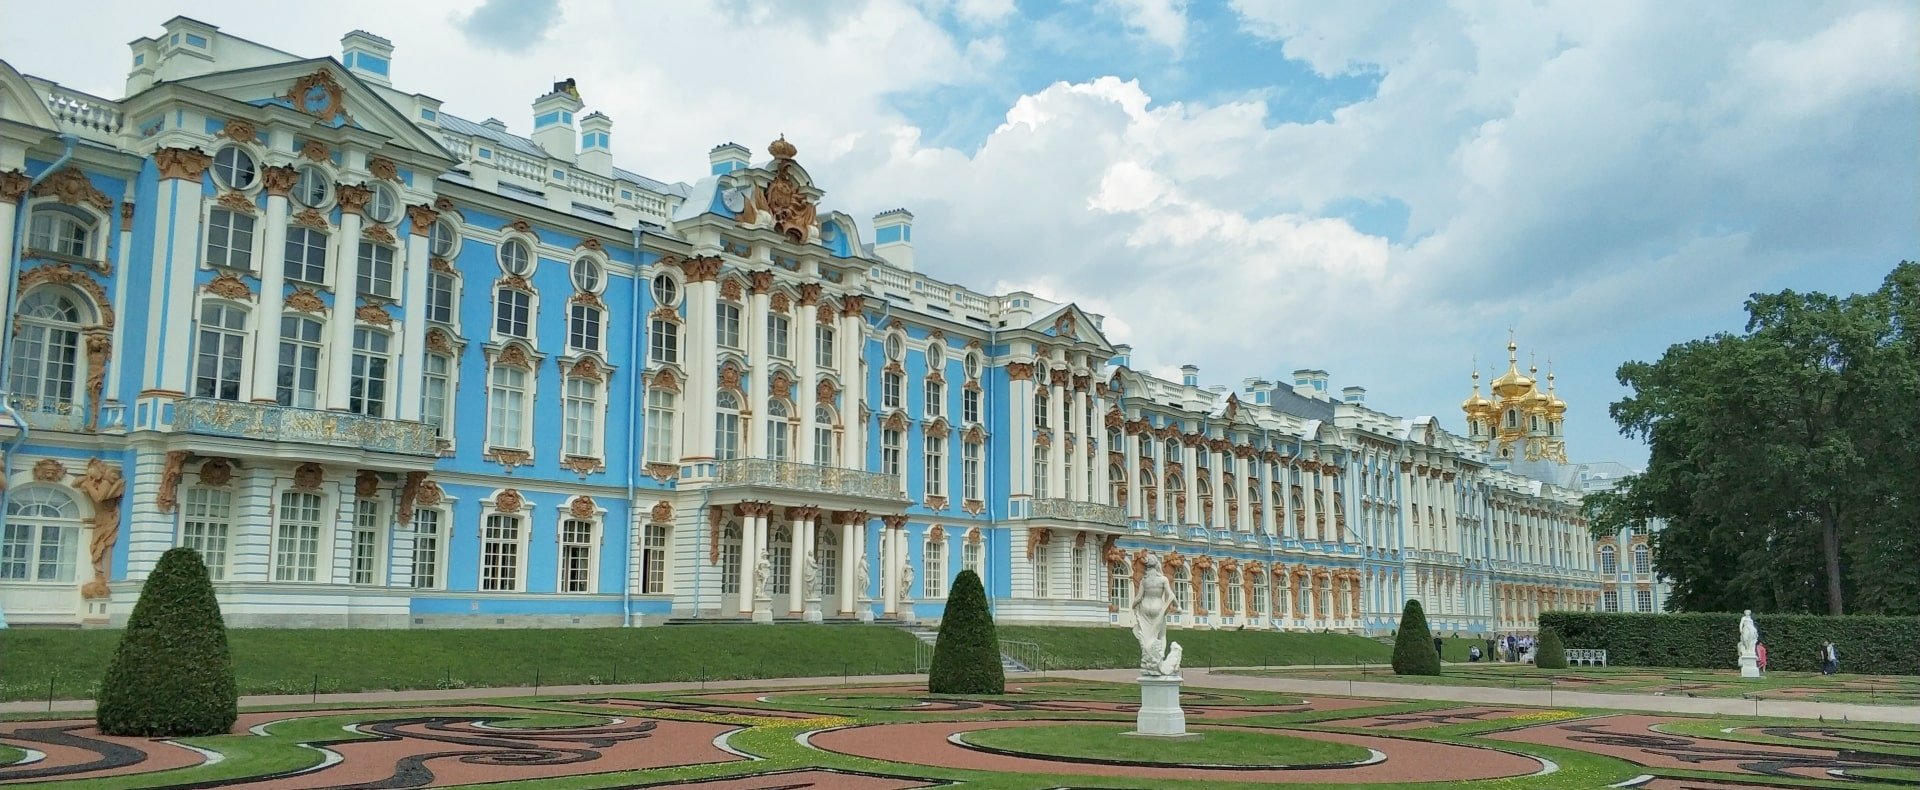 Visiting Catherine's Palace